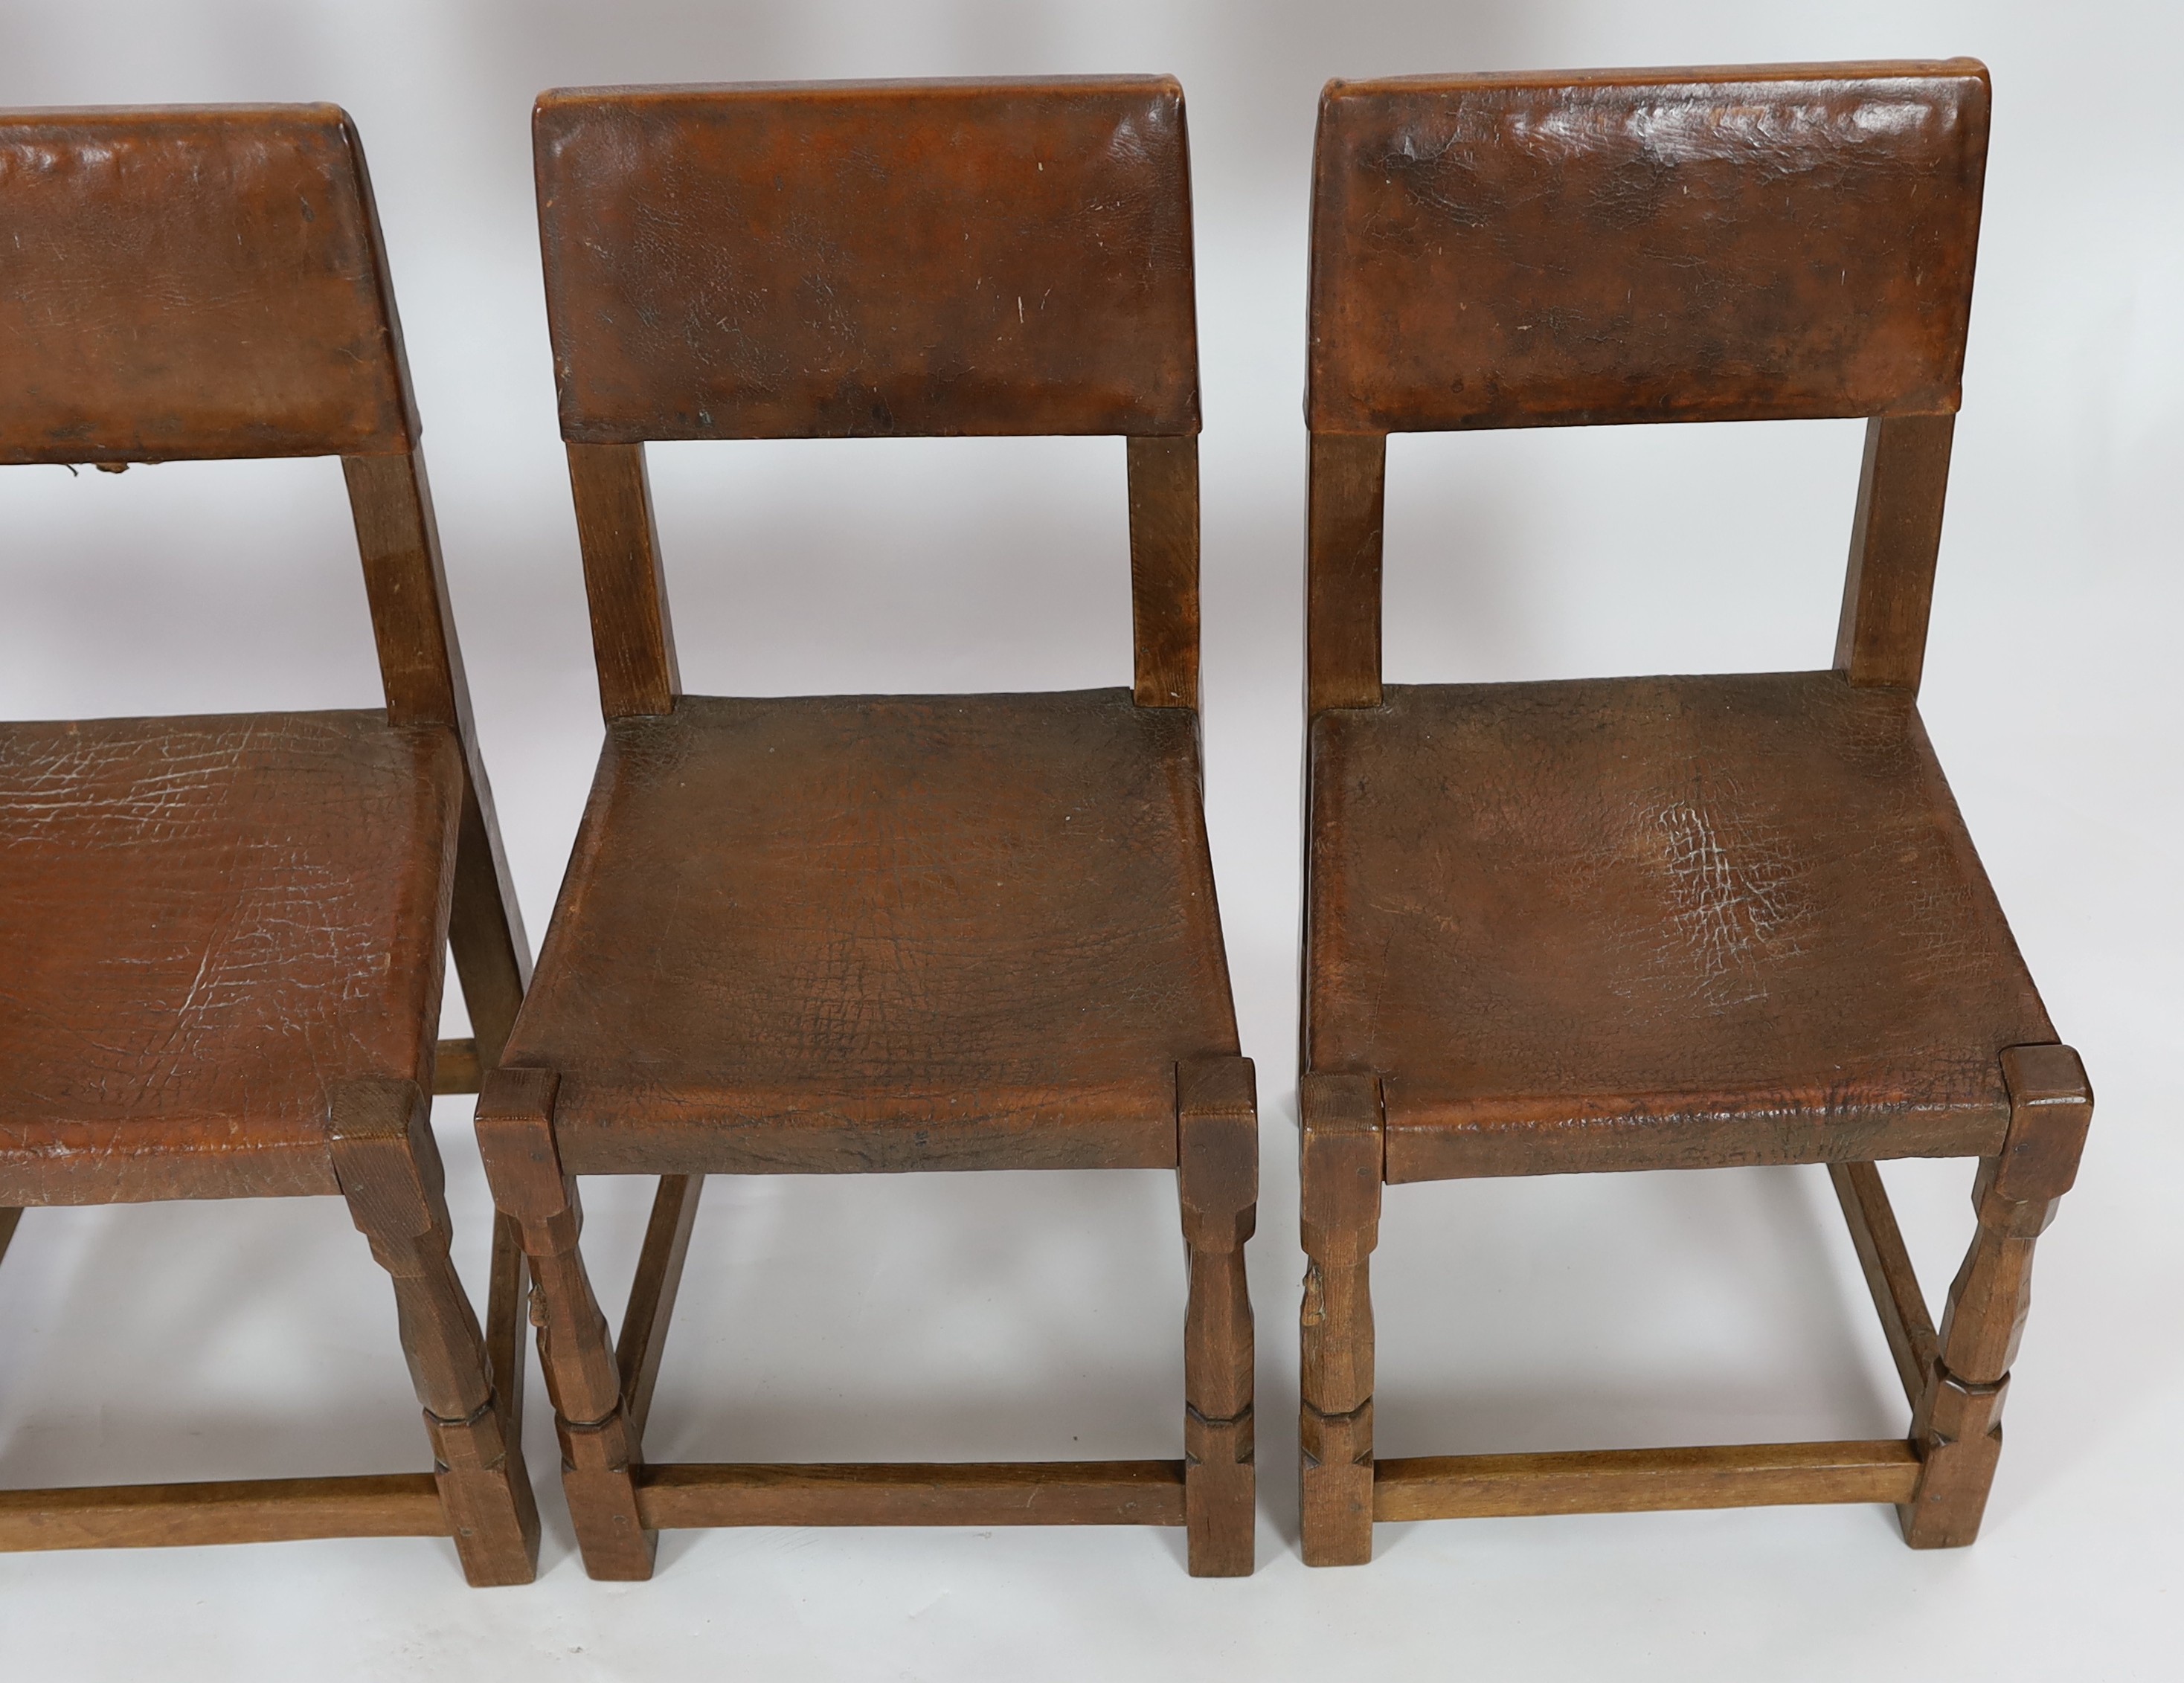 Robert Thompson of Kilburn. A Mouseman oak refectory table and four matching dining chairs, chairs width 44cm depth 47cm height 87cm